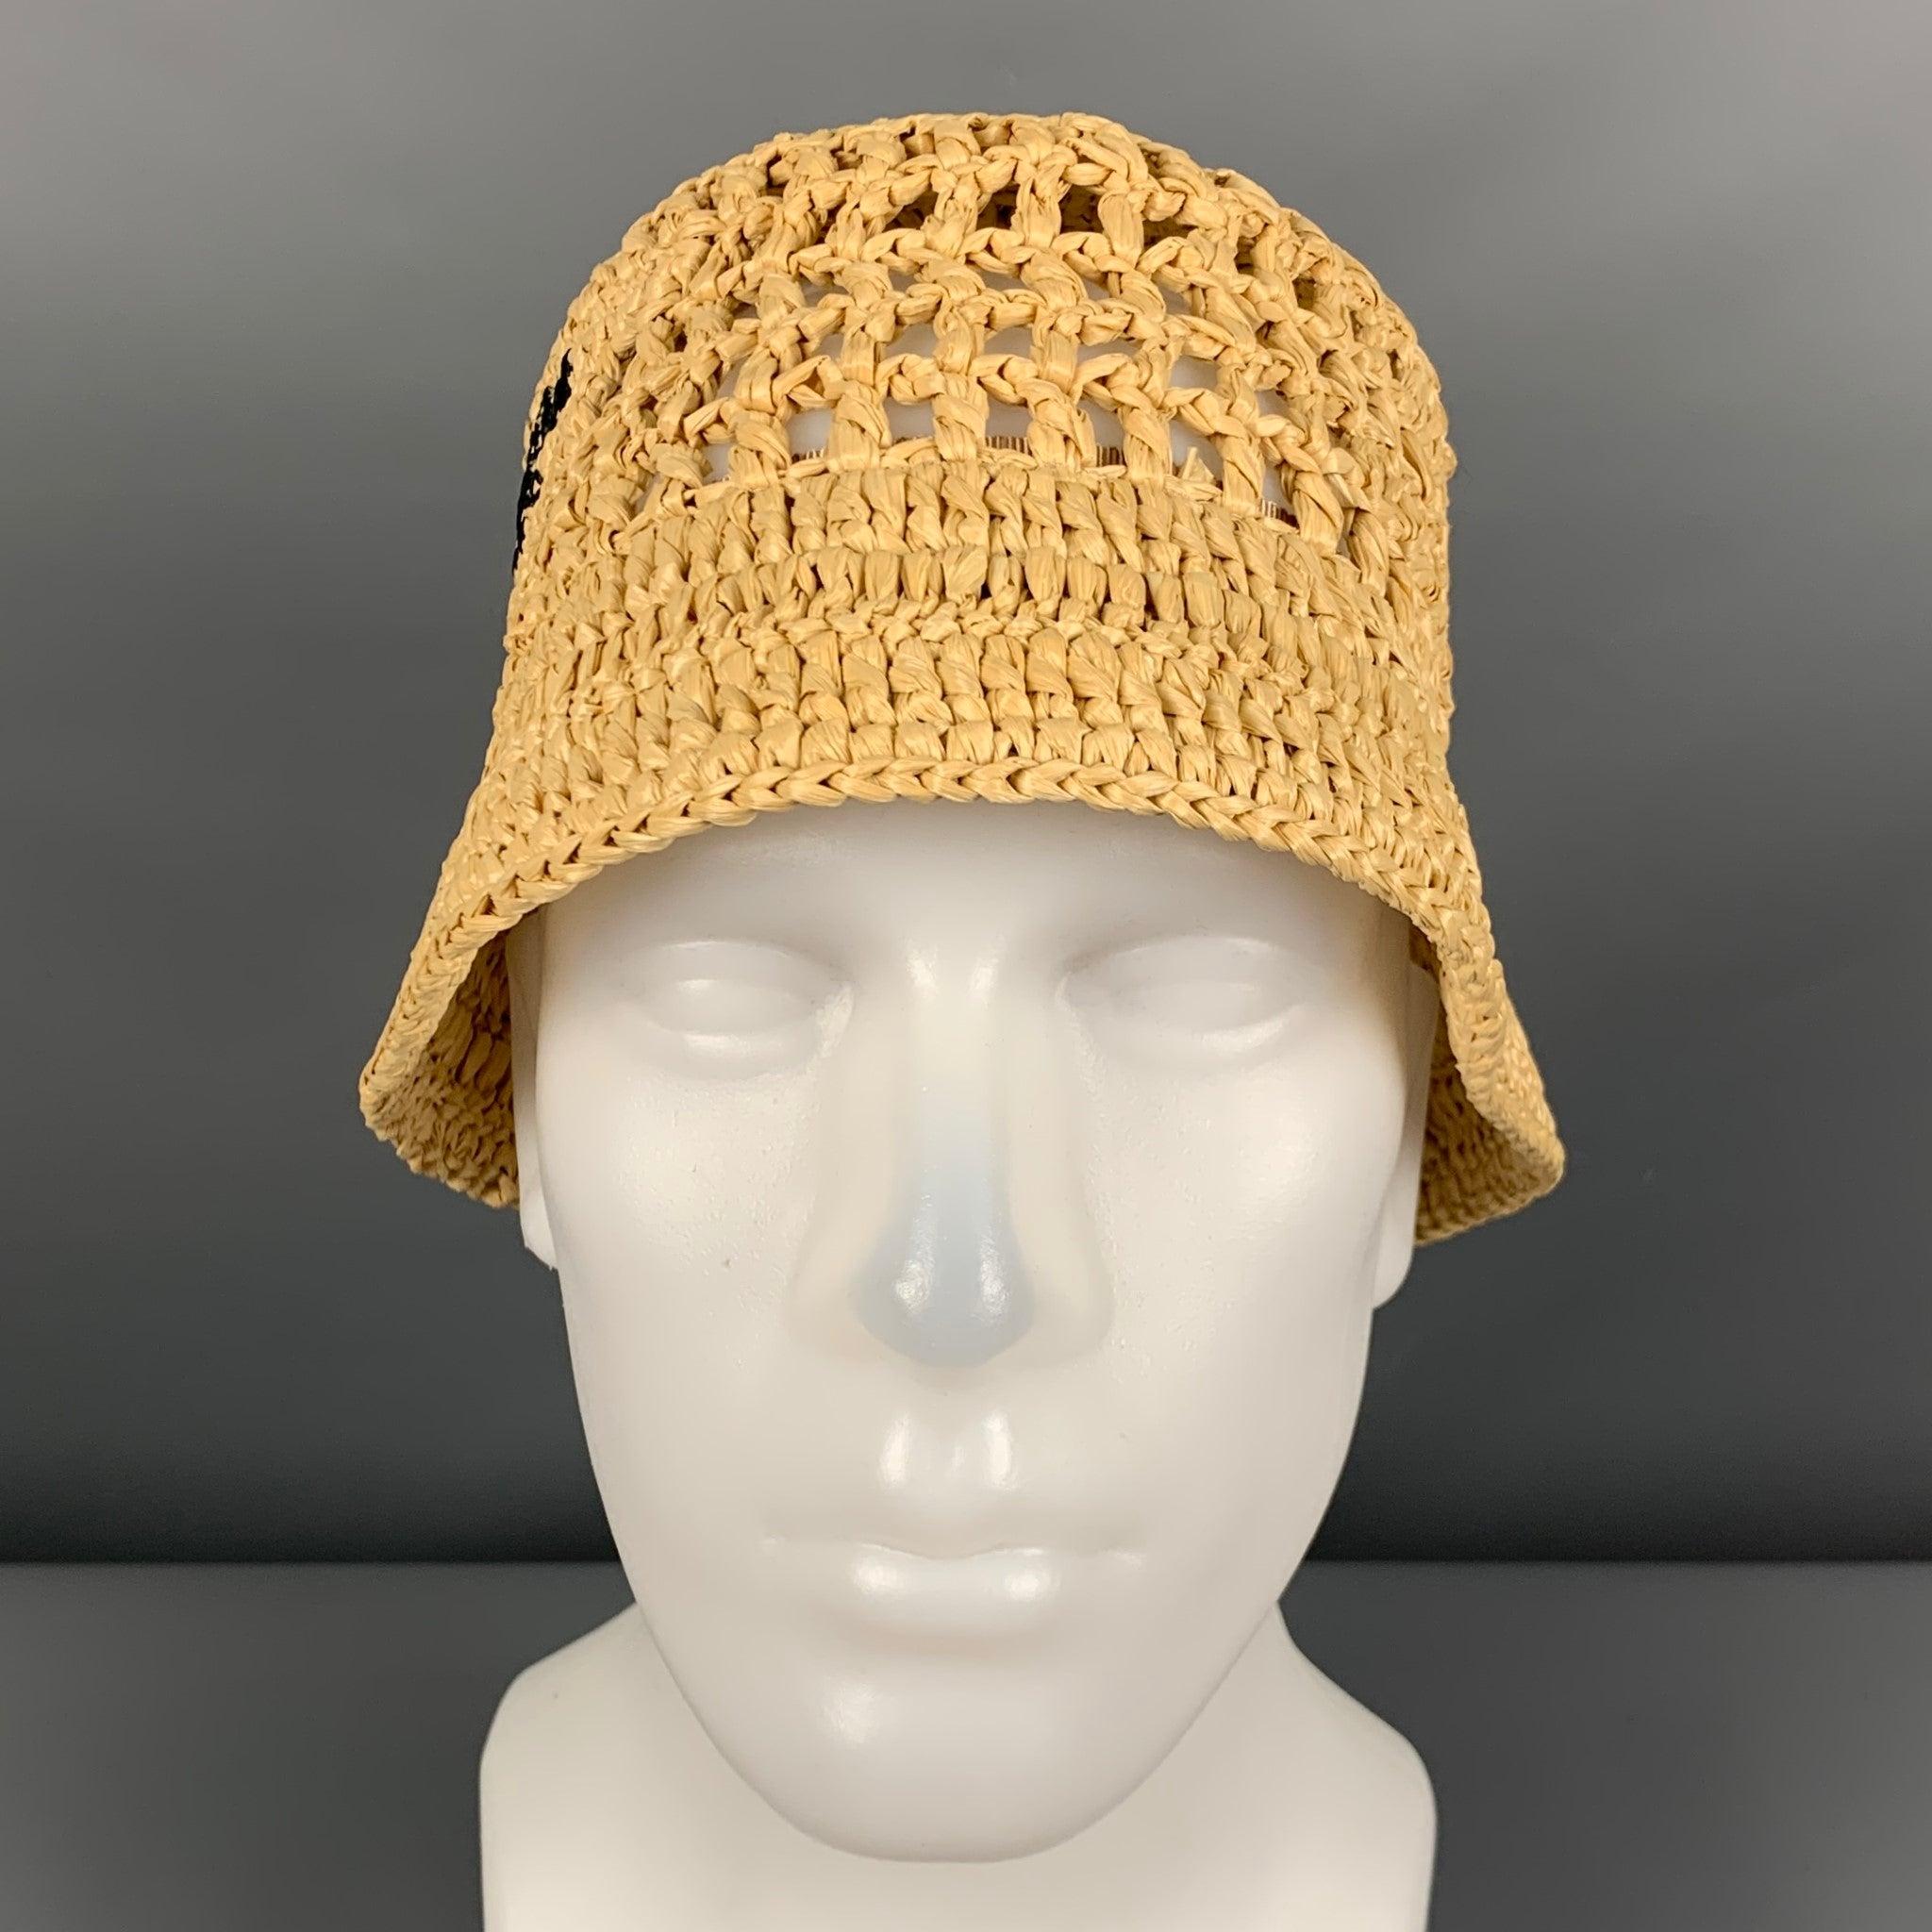 PRADA
hat in a beige viscose featuring a bucket style, crochet technique, and brand name embroidery. Made in Italy.New with Tags. 

Marked:   M 

Measurements: 
  Opening: 23 inches Brim: 2.25 inches Height: 5.25 inches  
  
  
 
Reference: